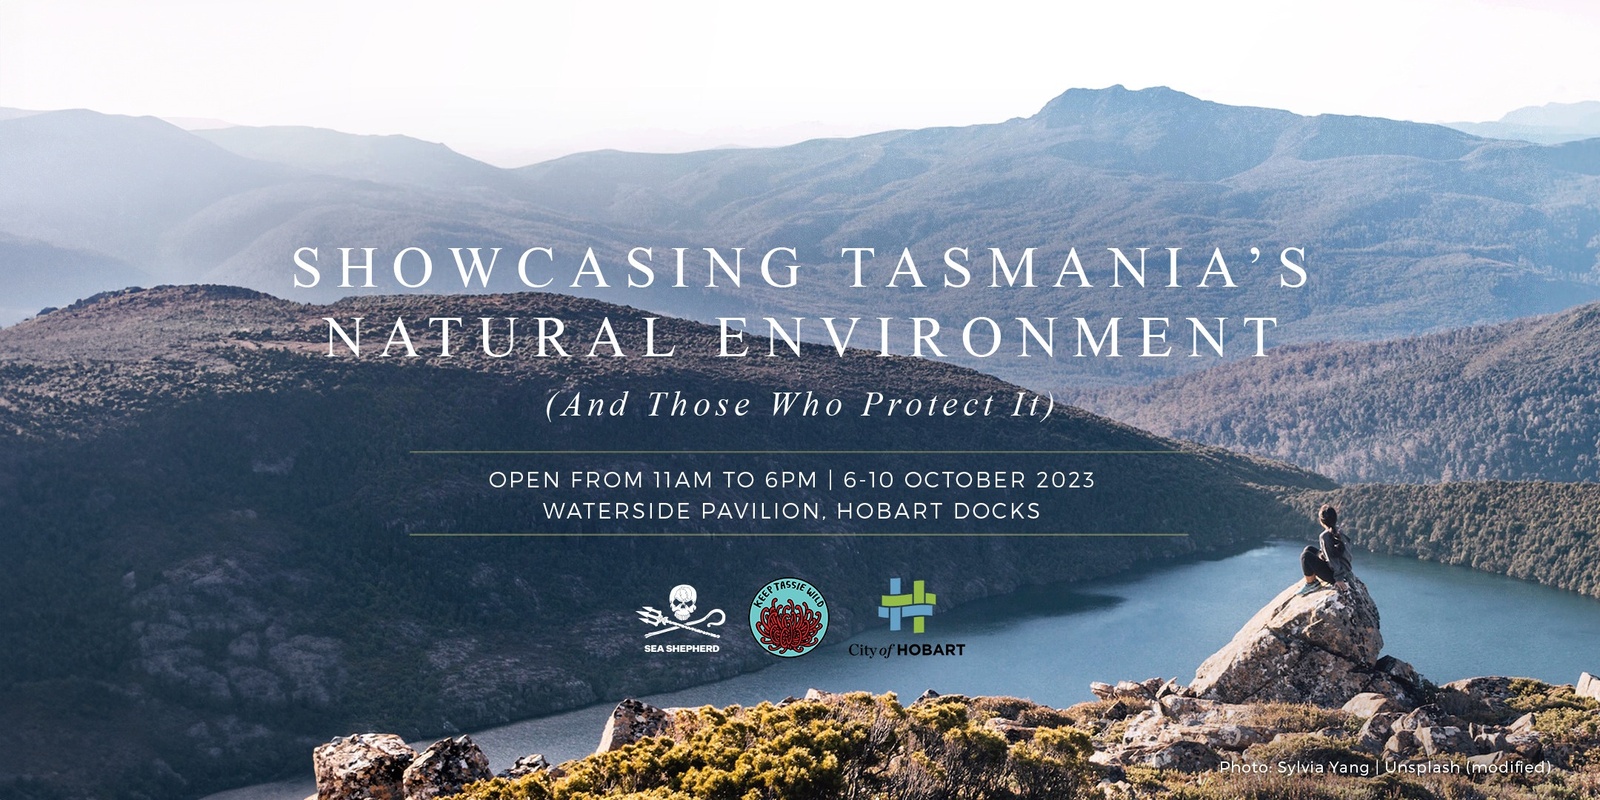 Banner image for Showcasing Tasmania’s Natural Environment (And Those Who Protect It)